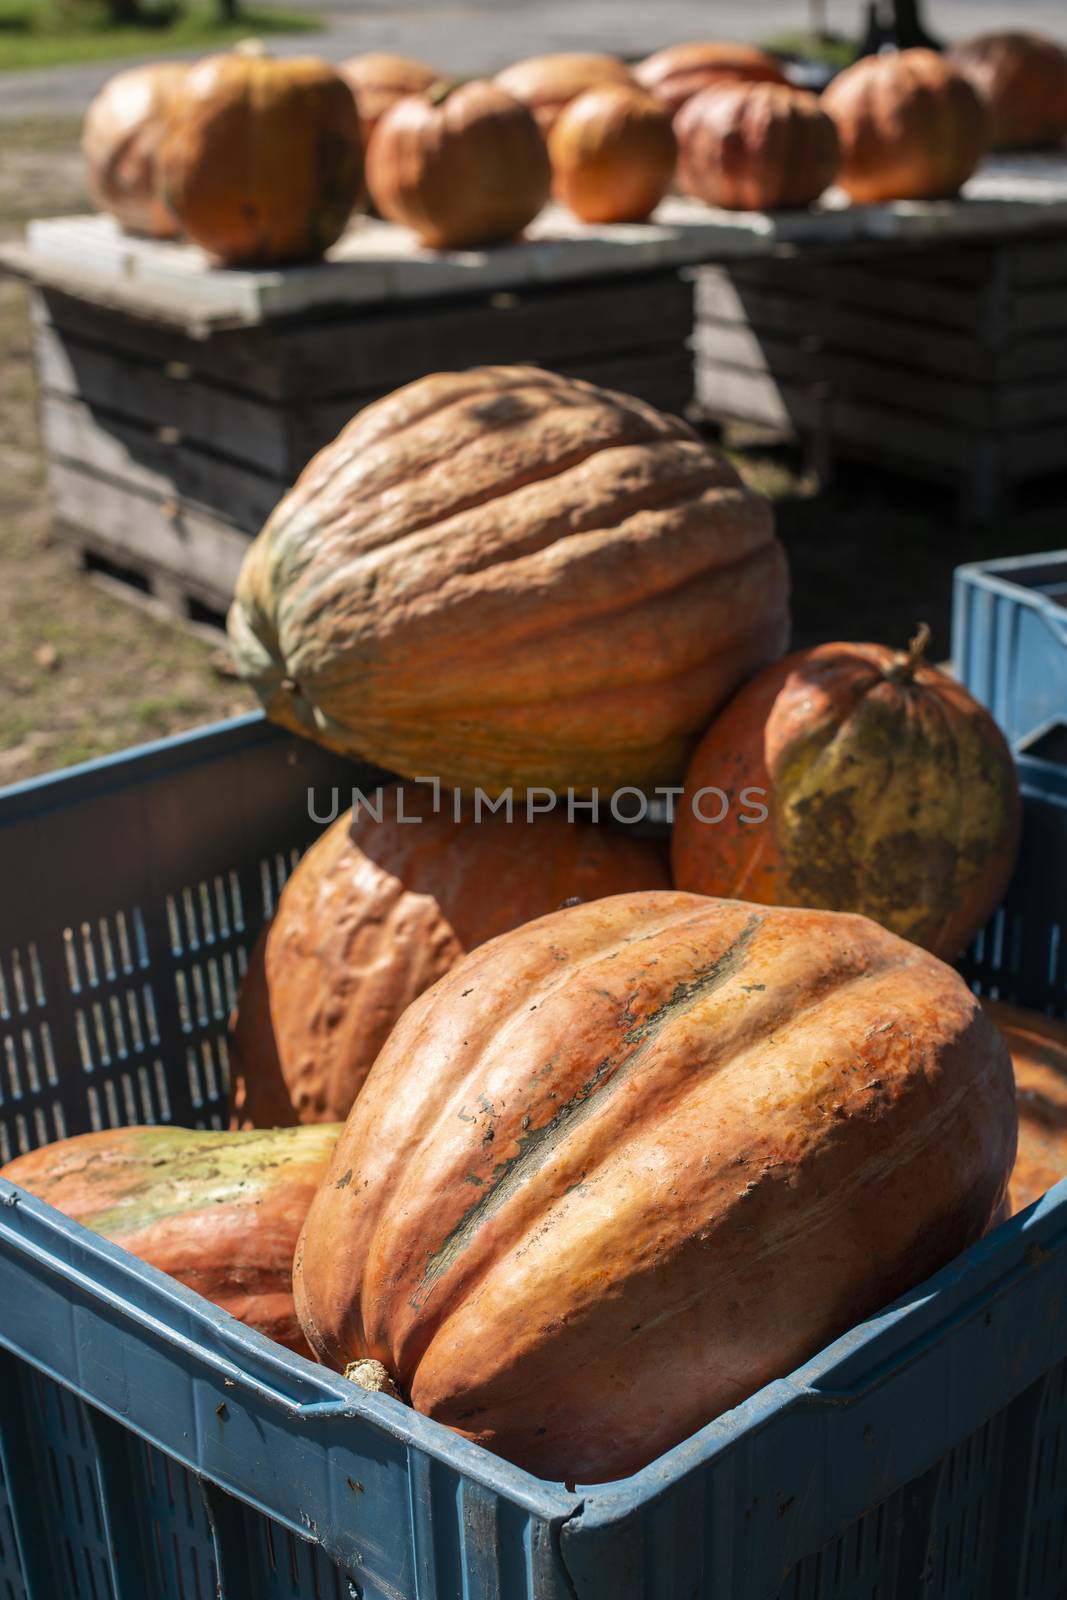 Variety of many pumpkins on the market. Different types pumpkins arranged on wooden table. Pumpkin background. Halloween graphic resources.